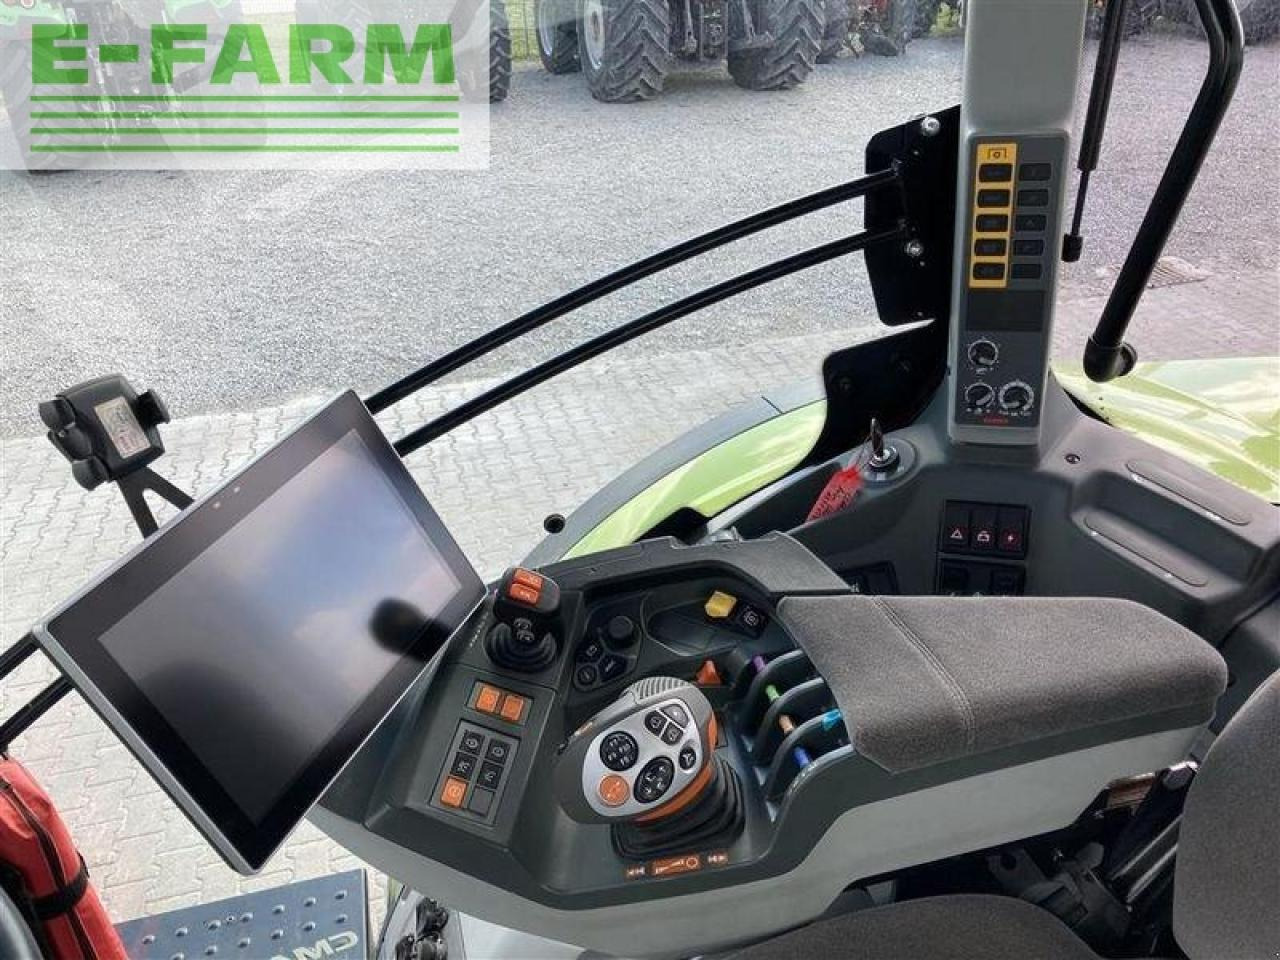 Tractor CLAAS arion 660 cmatic st5 cebis